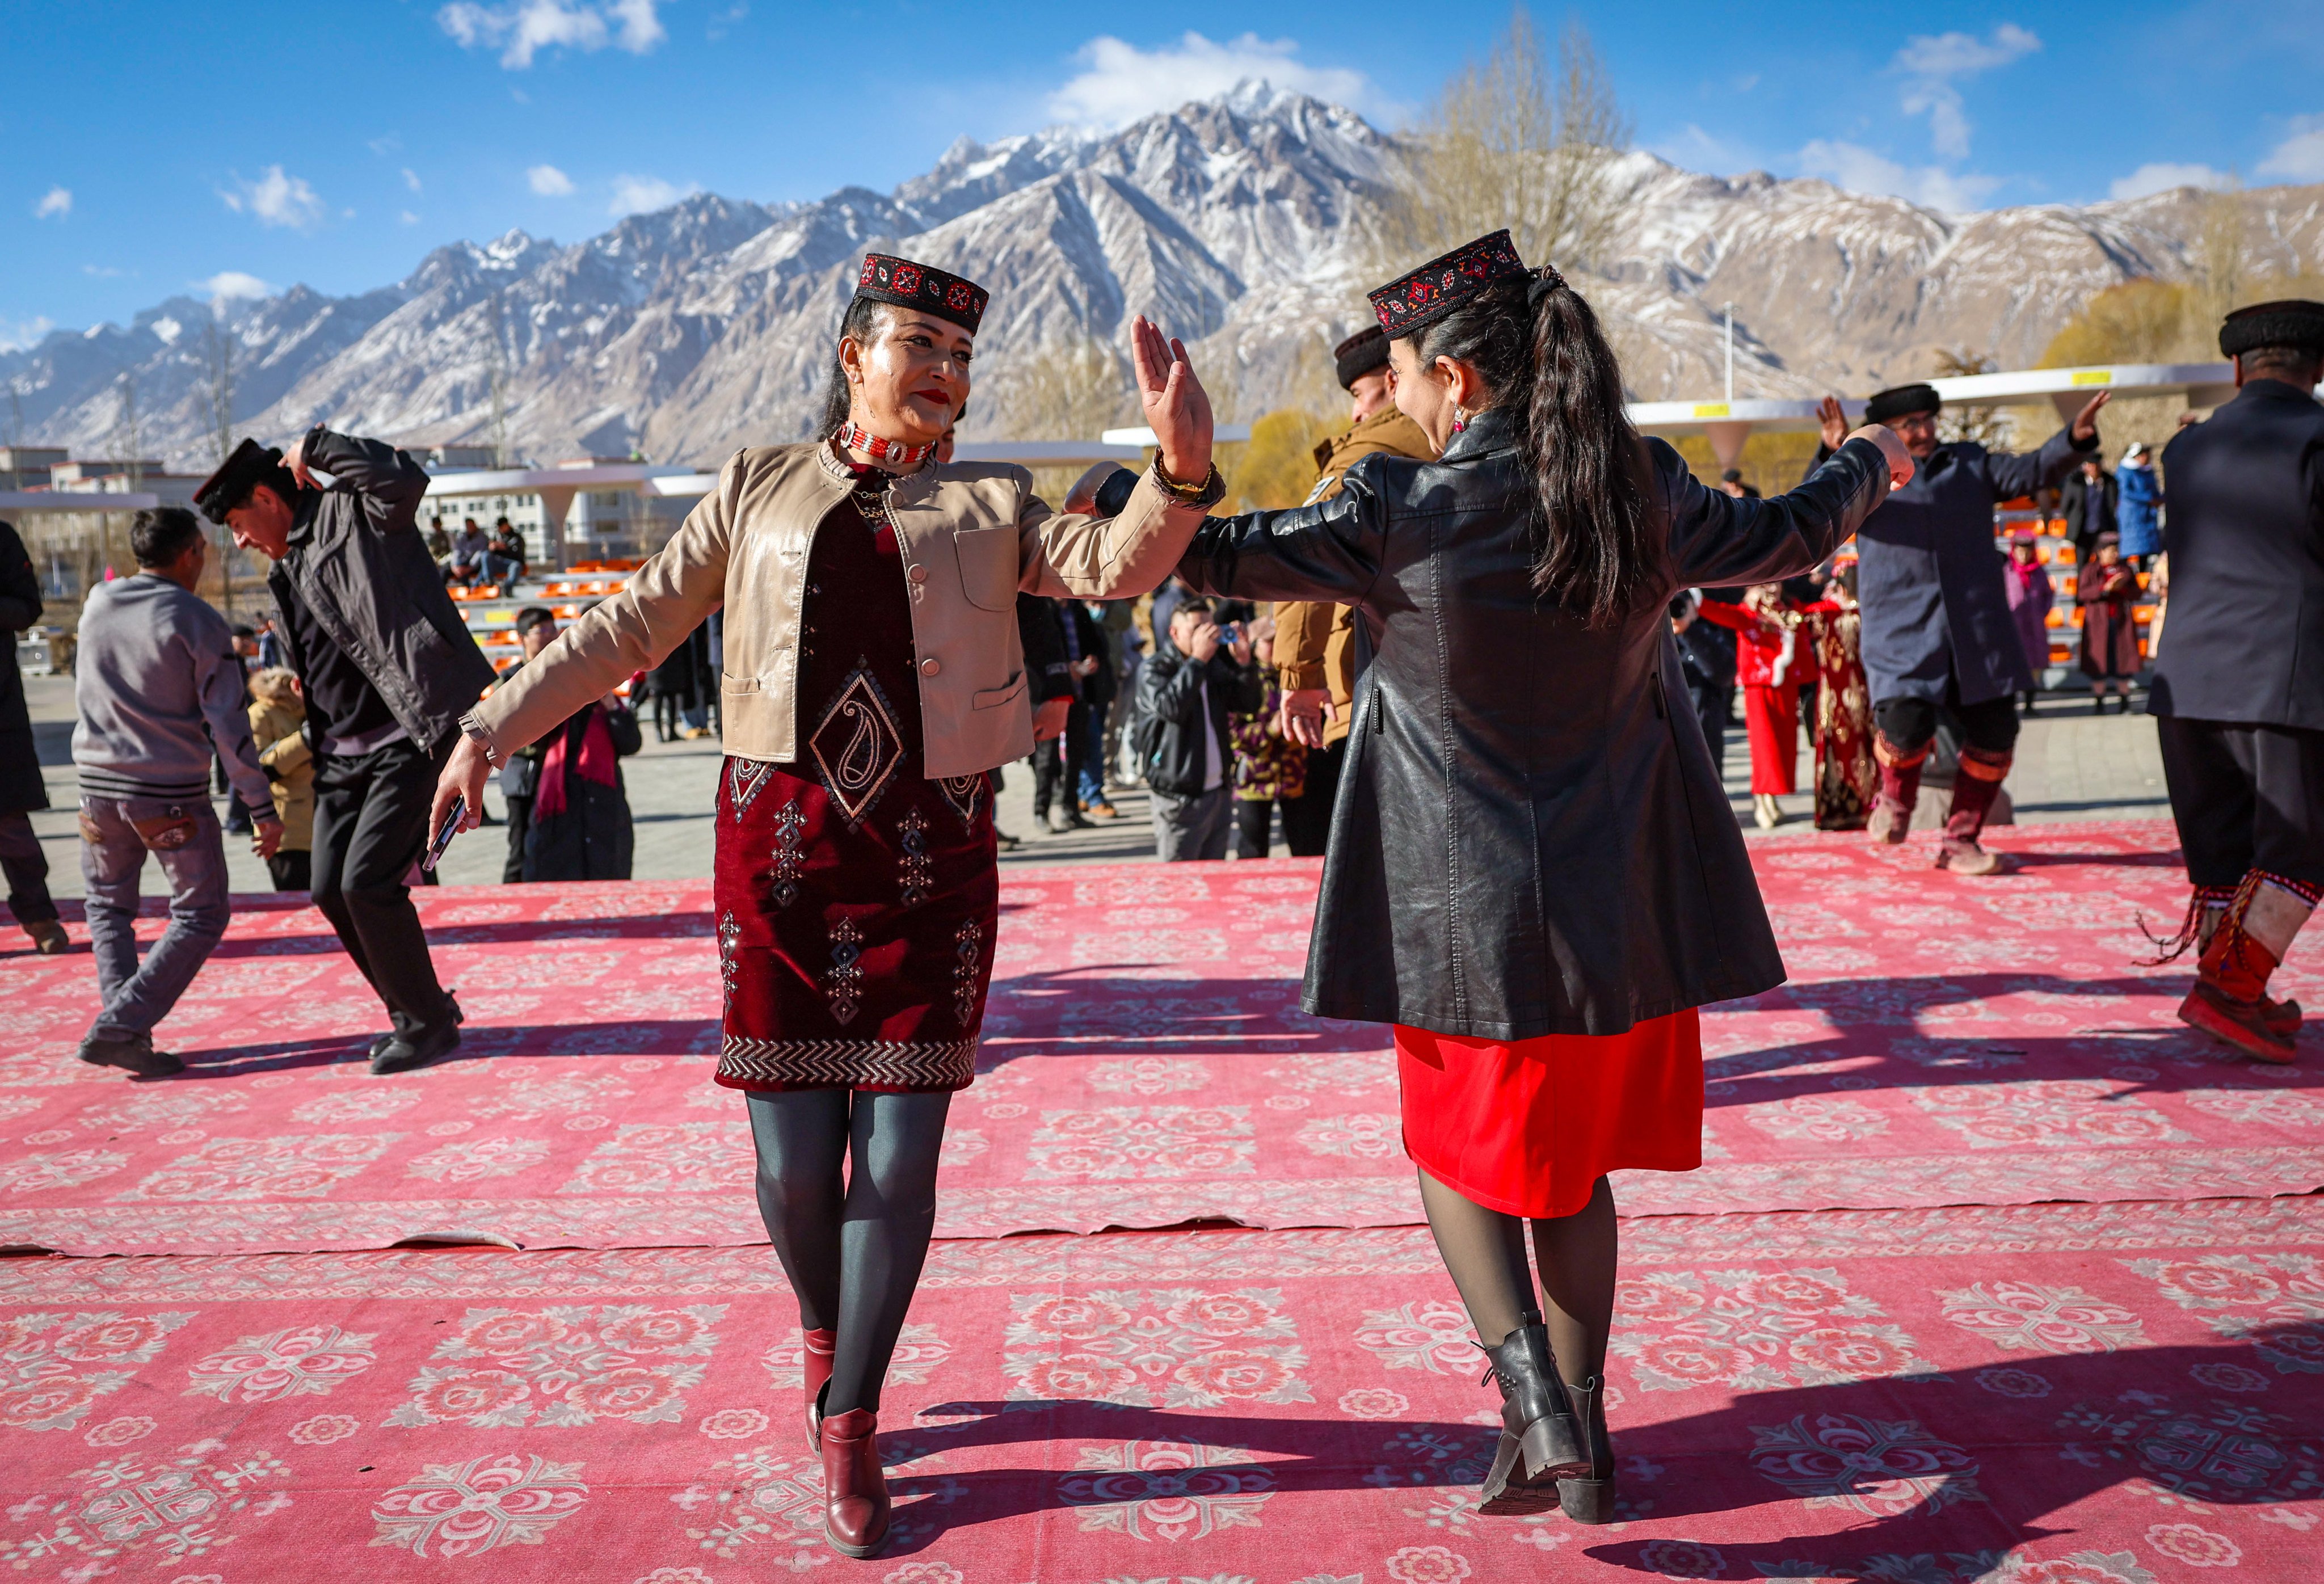 Xinjiang is home to 25.85 million people, 14.93 million of whom are members of ethnic minority groups, including Tajiks, pictured here, as well as Uygurs and Kazakhs. Photo: Xinhua